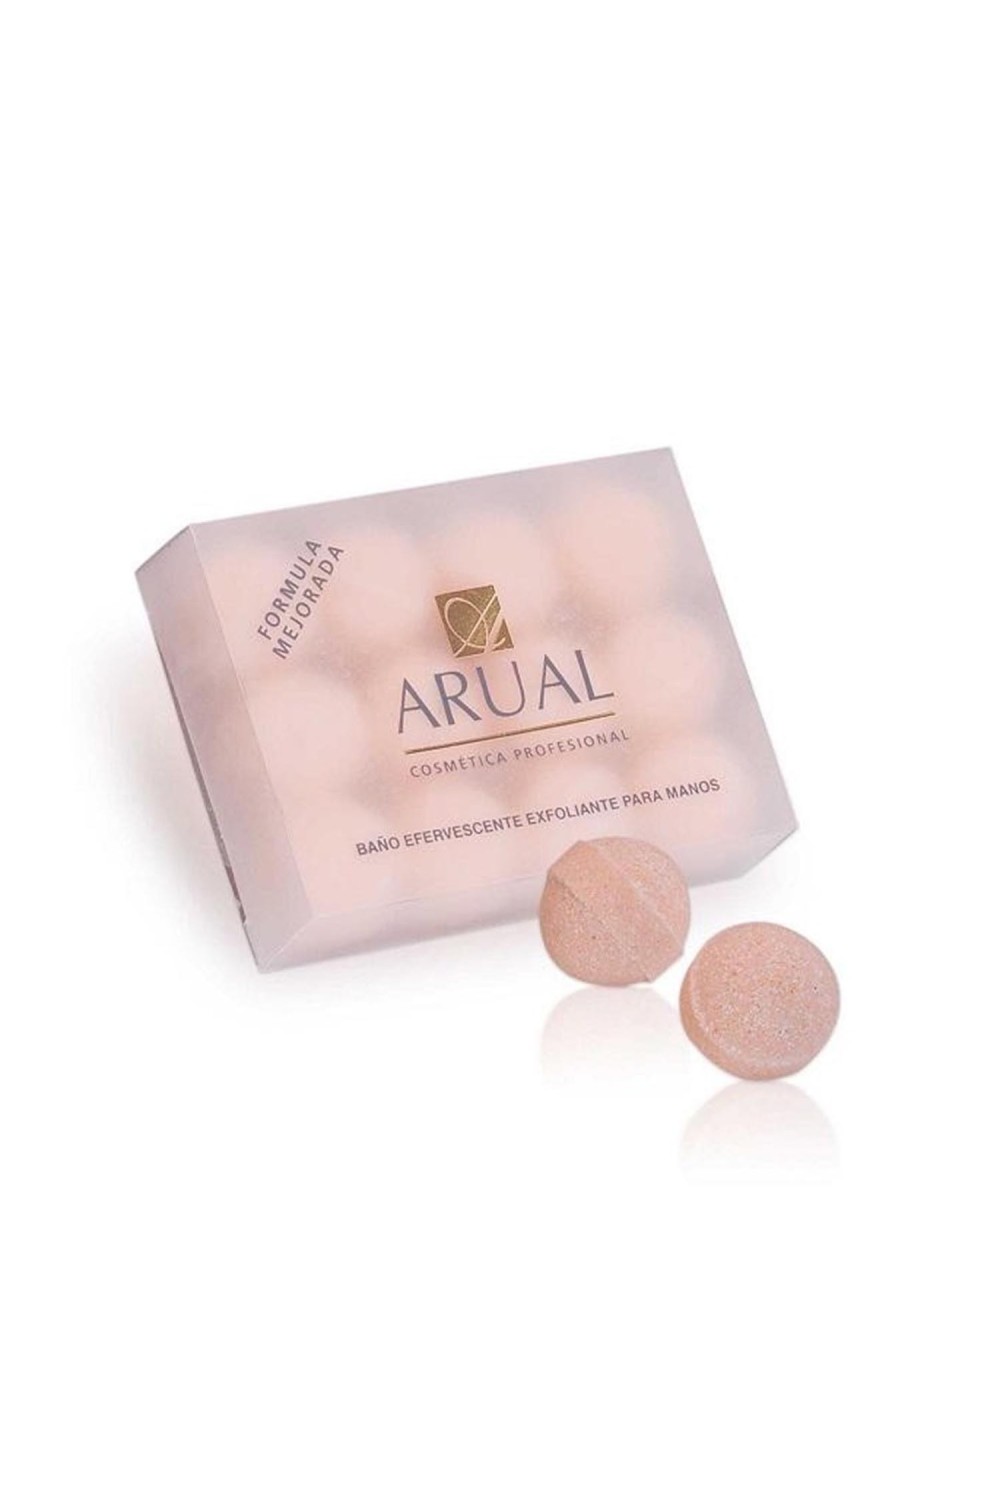 Arual Effervescent Exfoliating Bath For Hands 12 Units